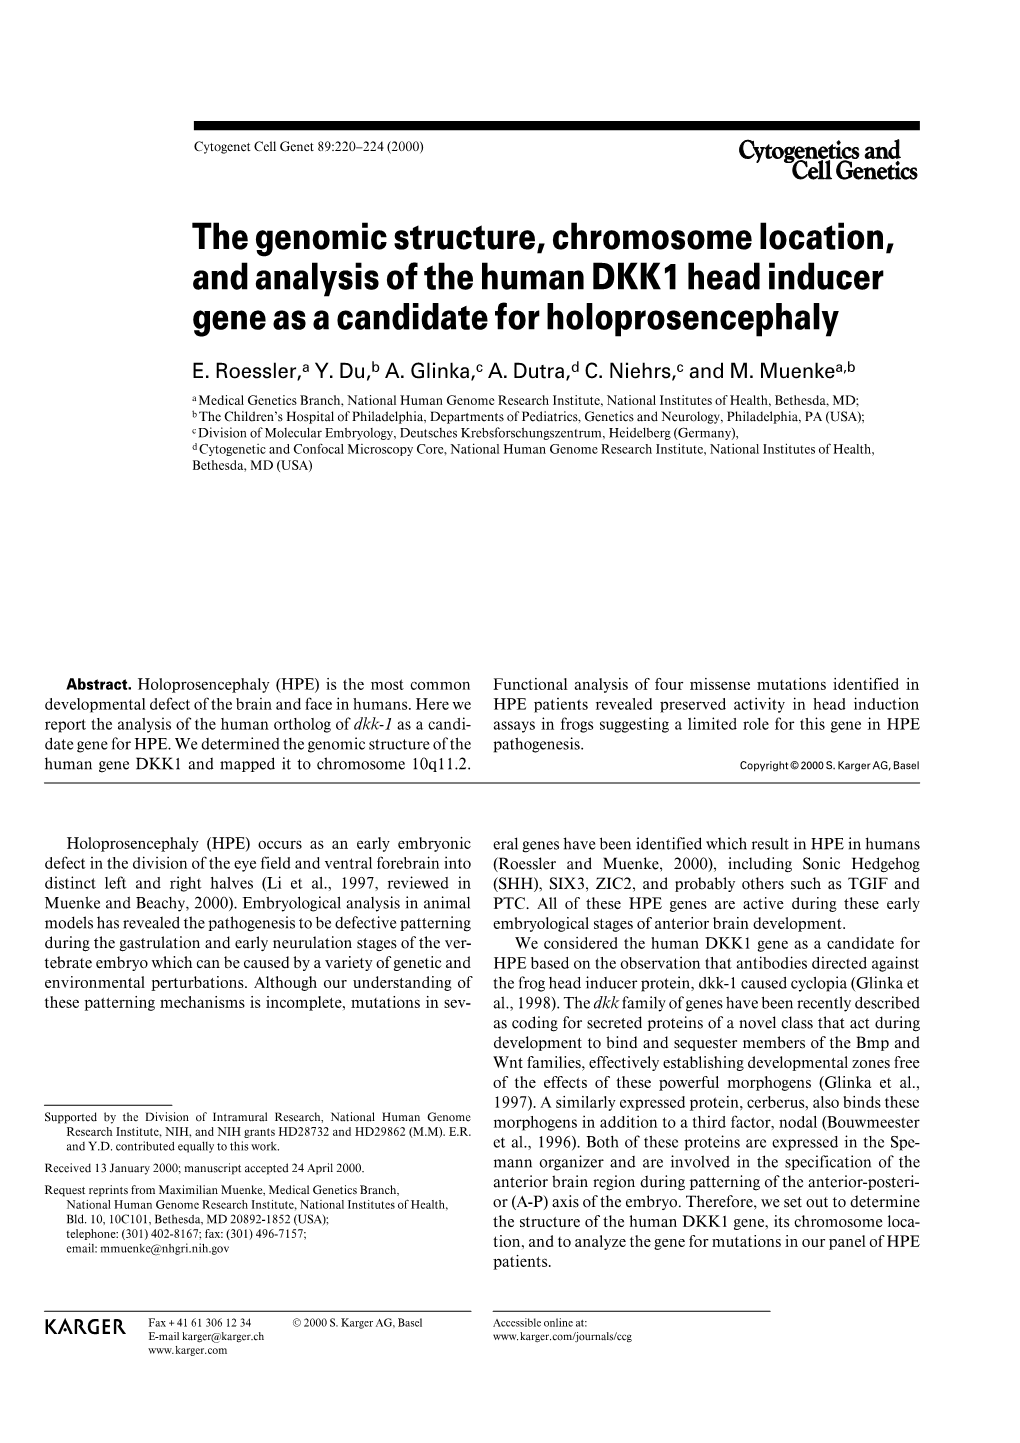 The Genomic Structure, Chromosome Location, and Analysis of the Human DKK1 Head Inducer Gene As a Candidate for Holoprosencephaly